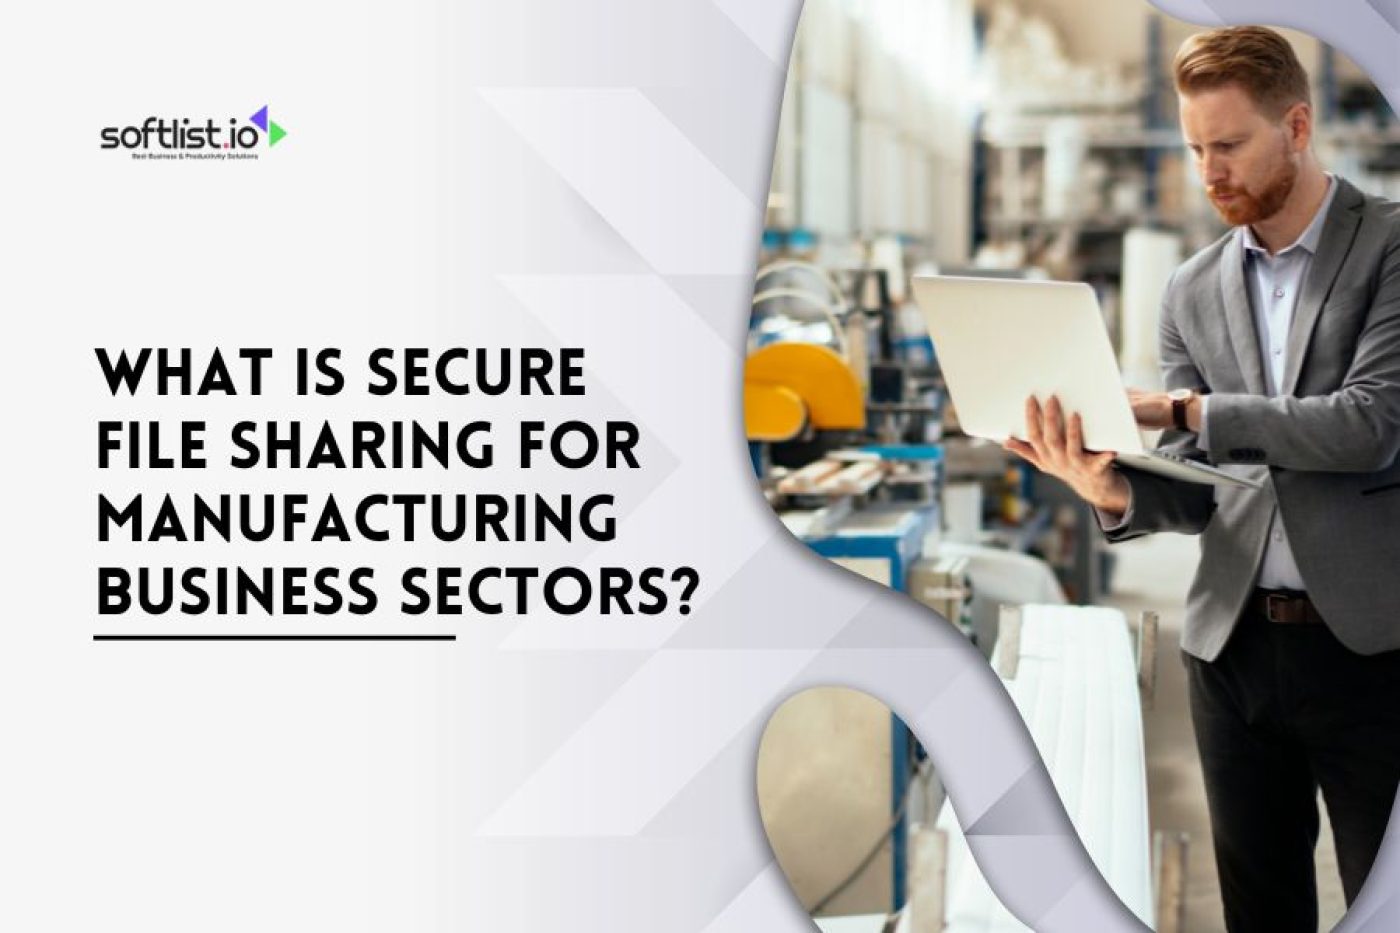 What is Secure file sharing for Manufacturing Business Sectors